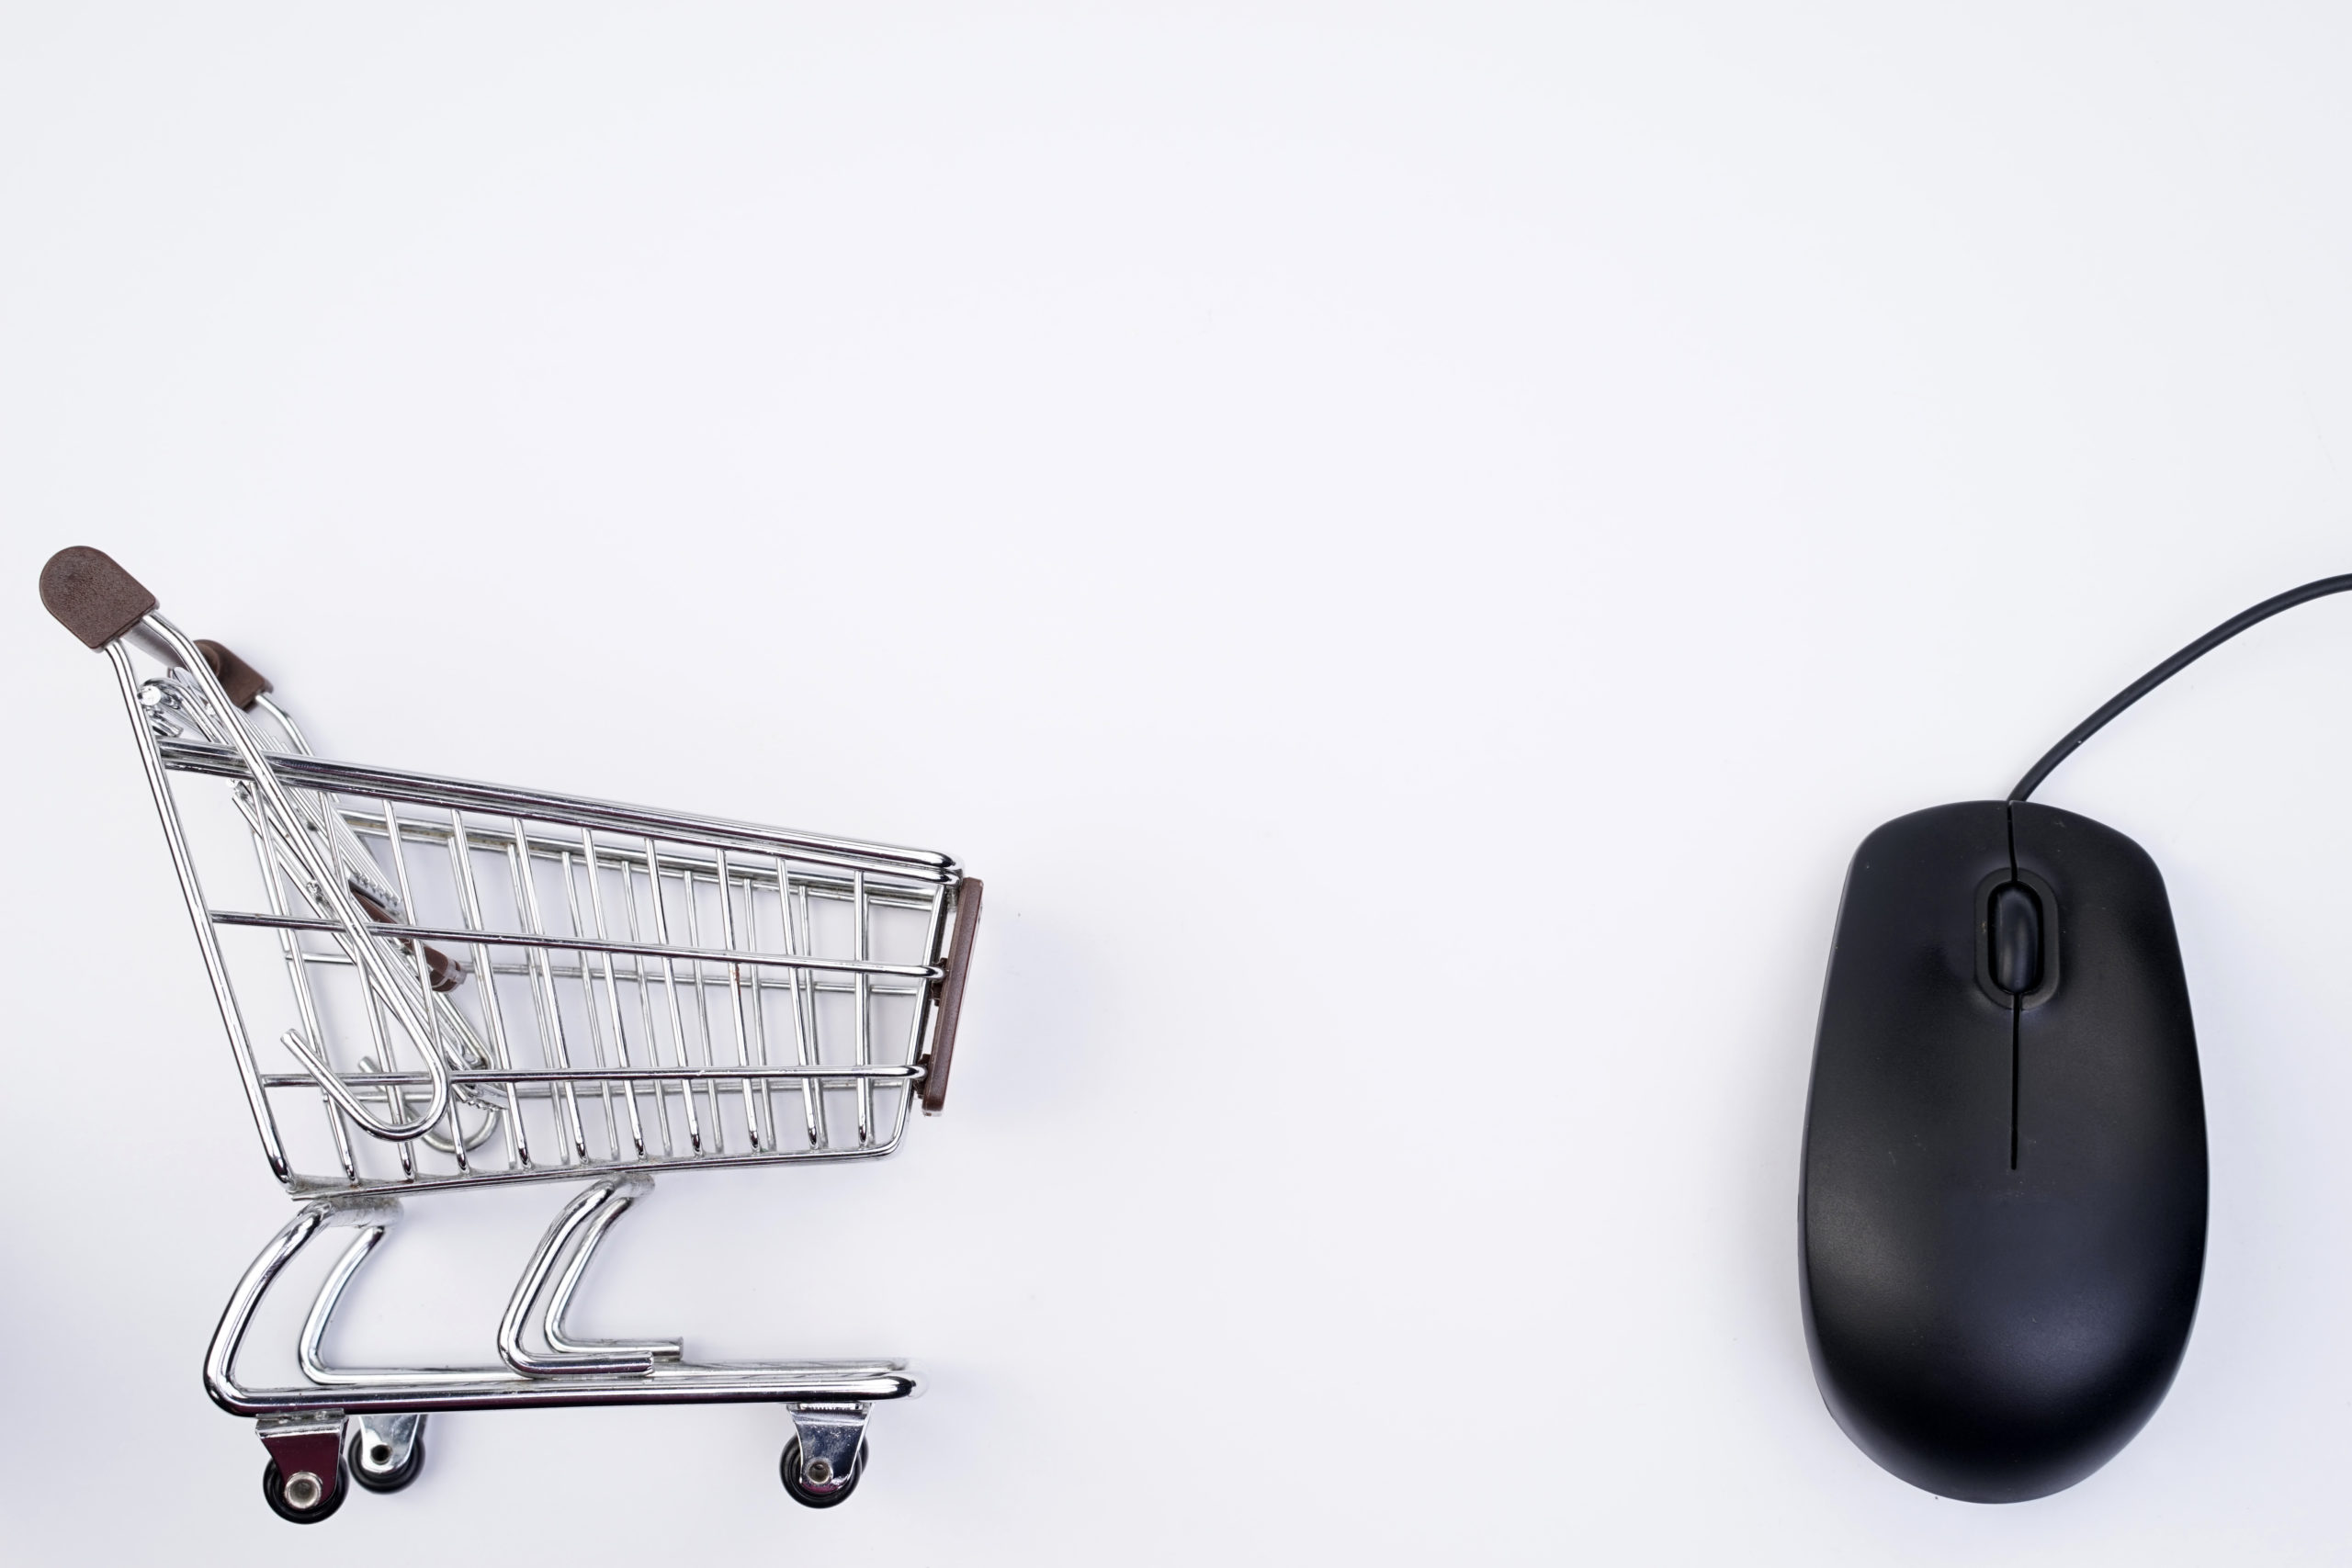 Reoptimizing existing web pages helps ranking and drives more traffic to your e-commerce store